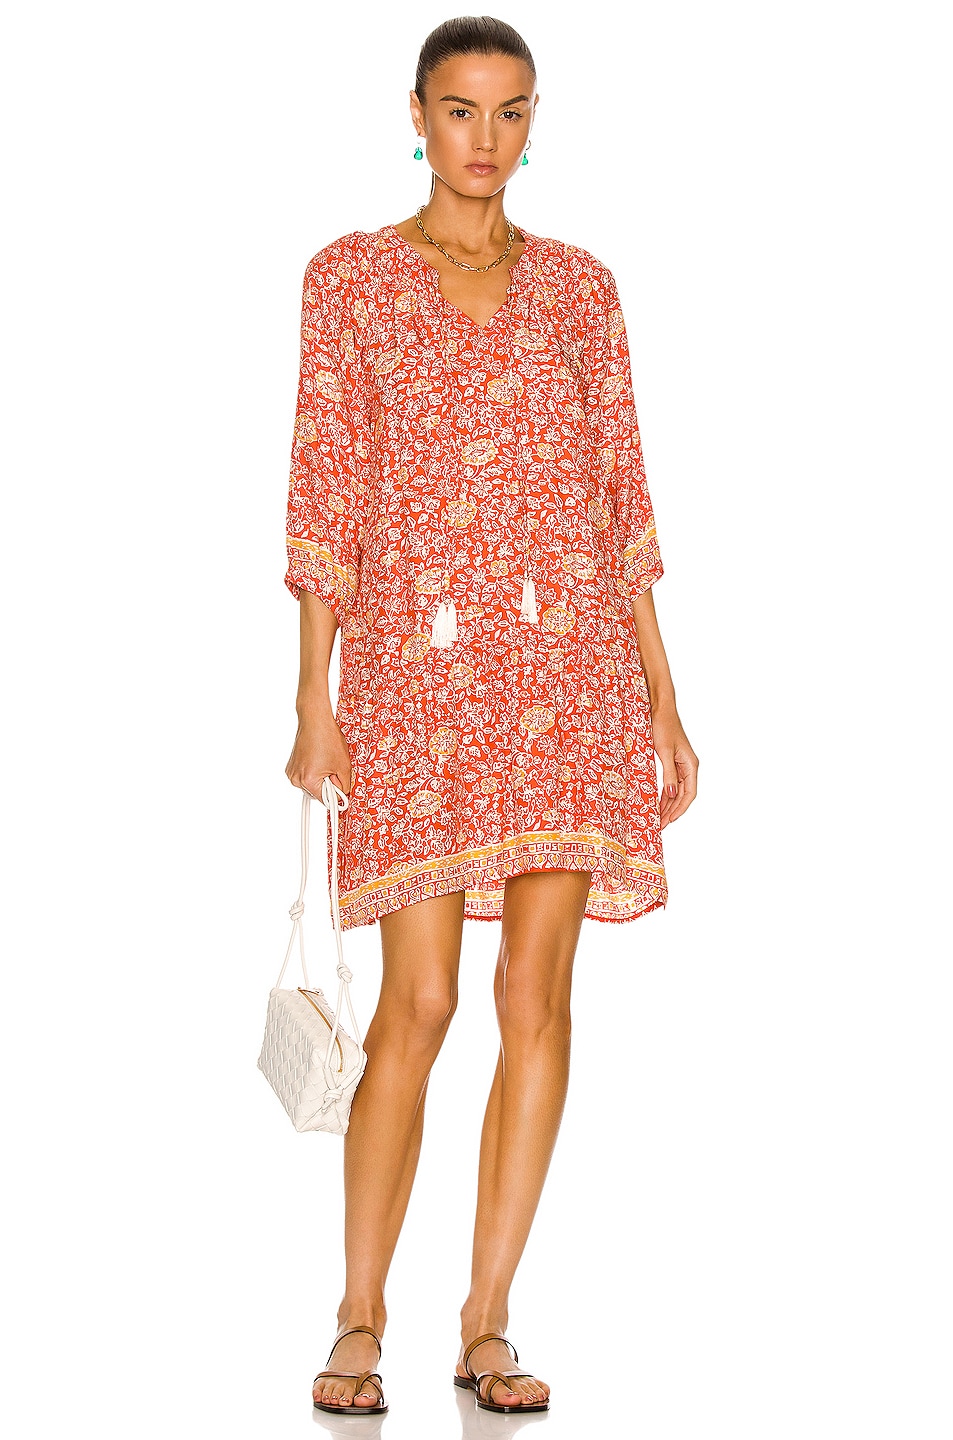 Image 1 of Natalie Martin Stevie Dress in Floral Print Tuscany Sun